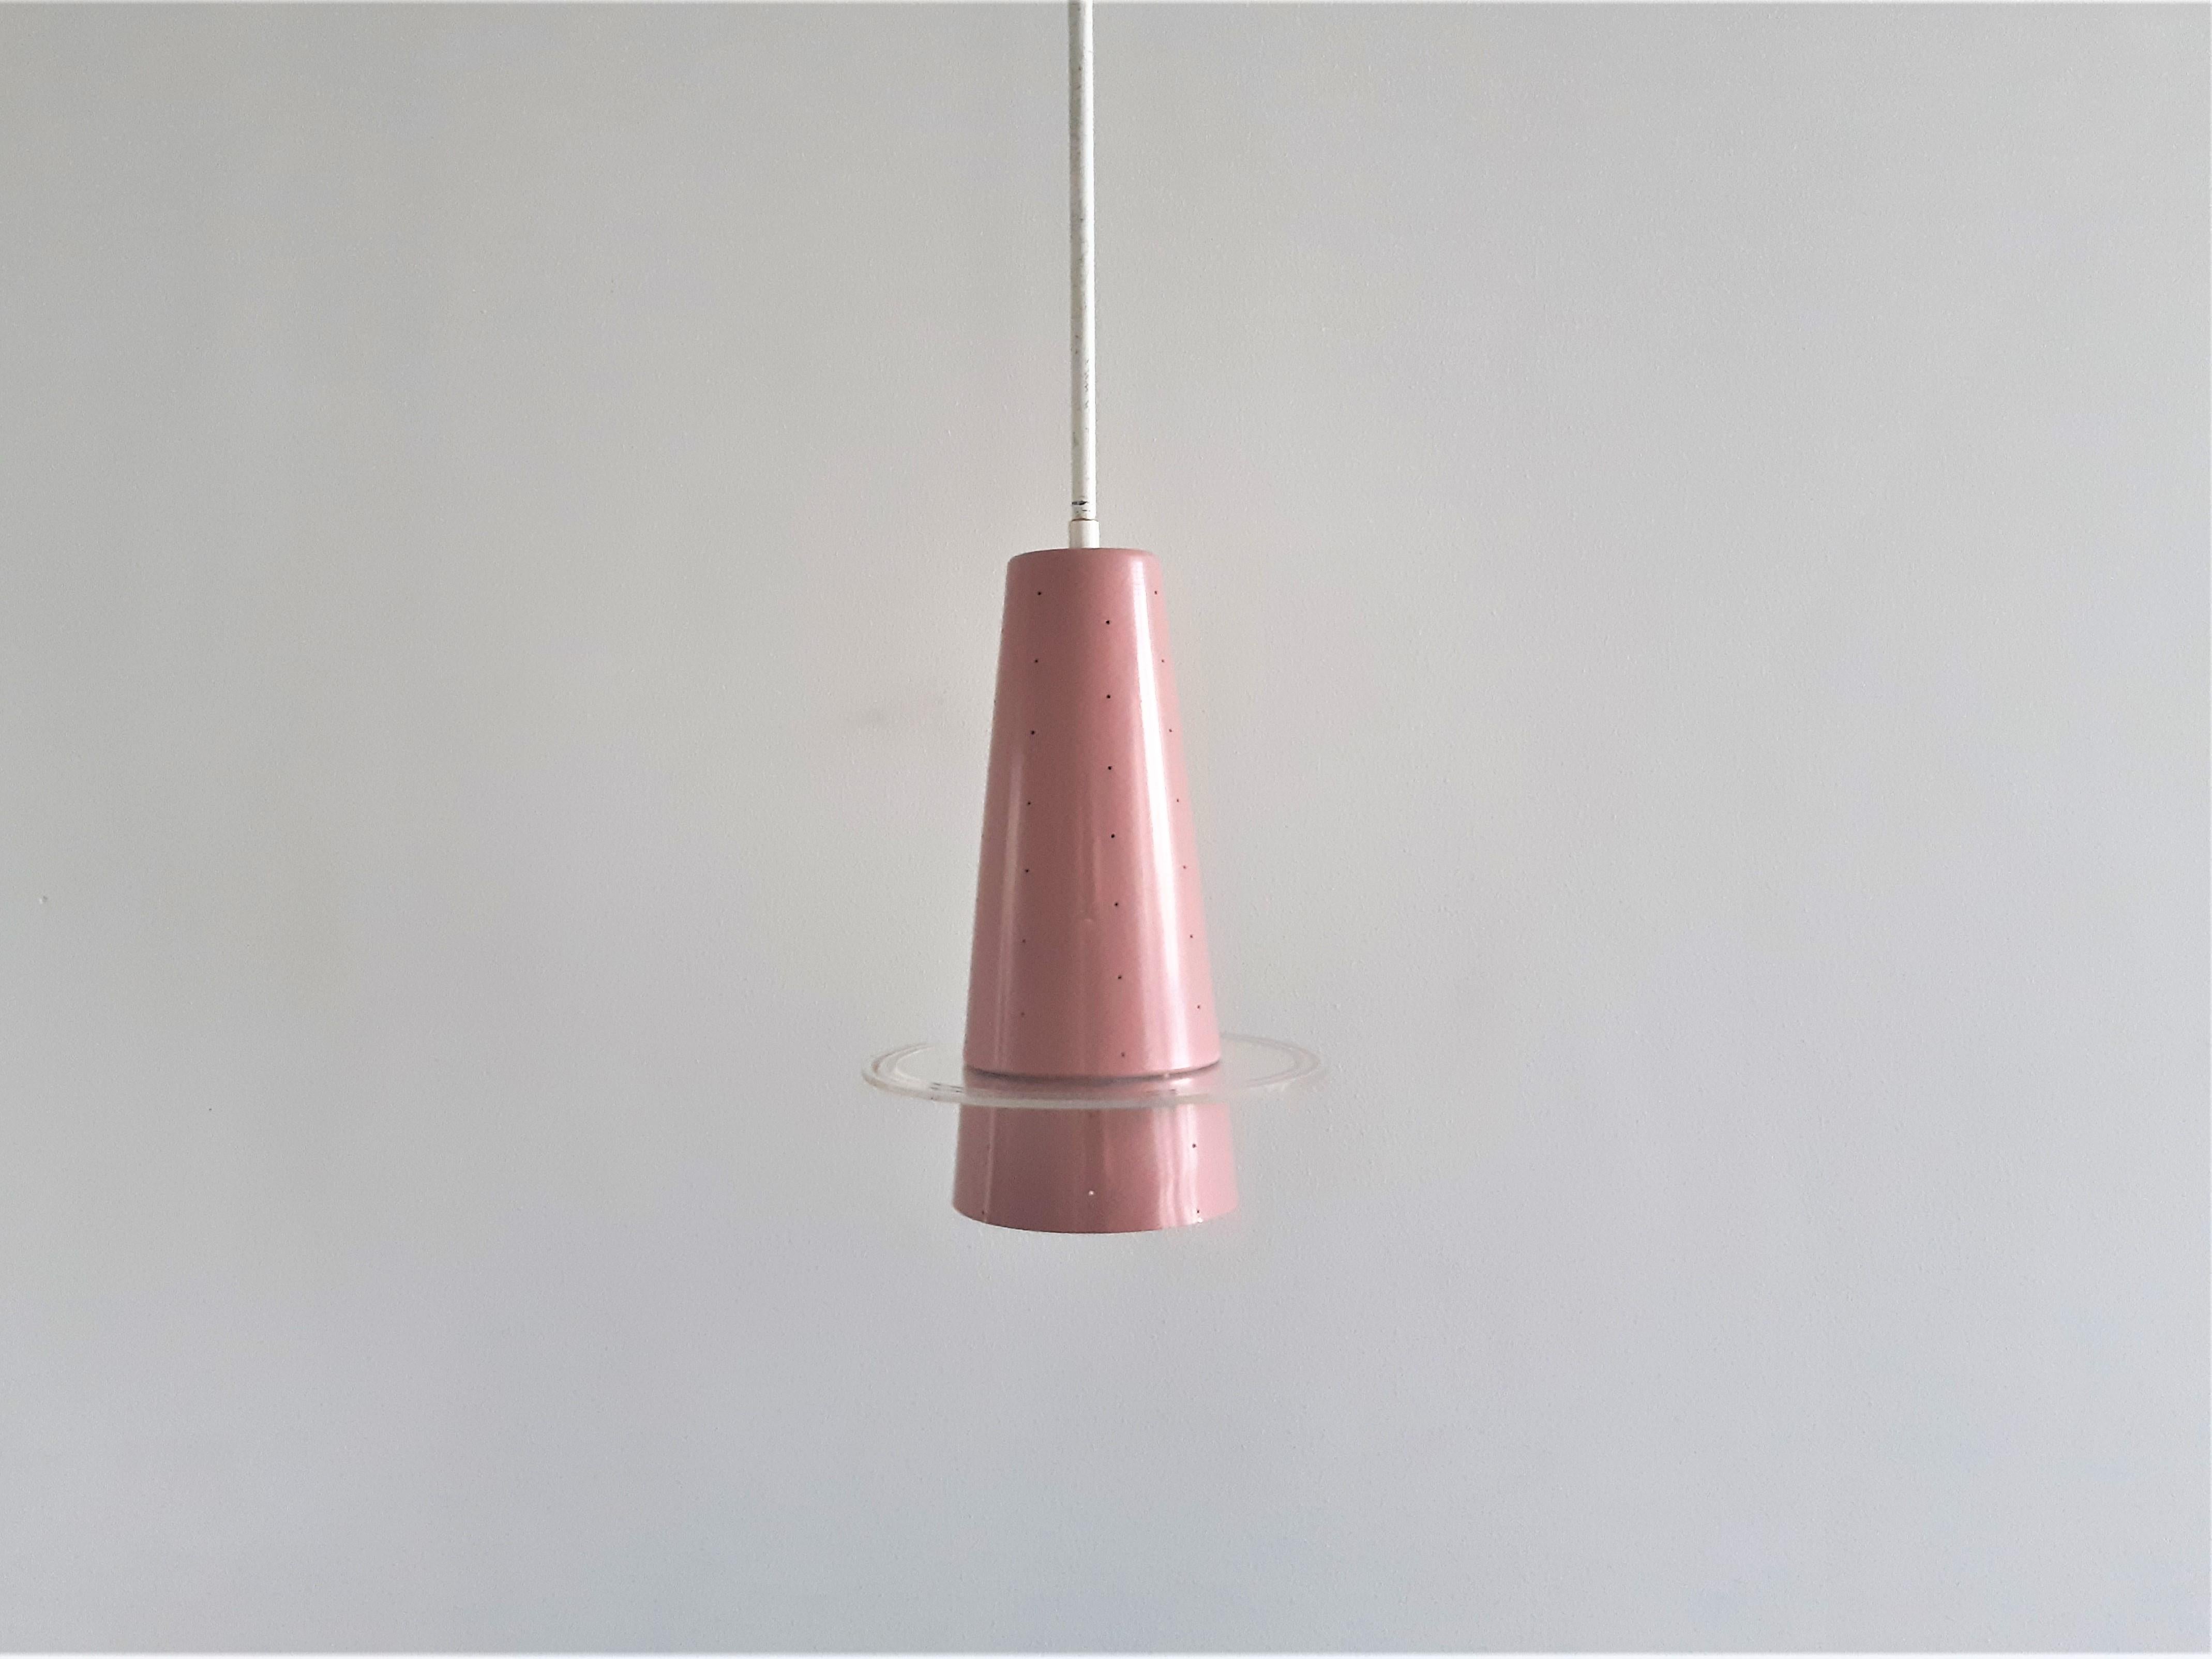 This rare and very elegant pendant lamp, model 205, was made by the Dutch company Evenblij in the 1960's. It has a pink metal conical perforated shade provided with a clear plexiglass disc that gives a stunning and magical light when lit. This lamp